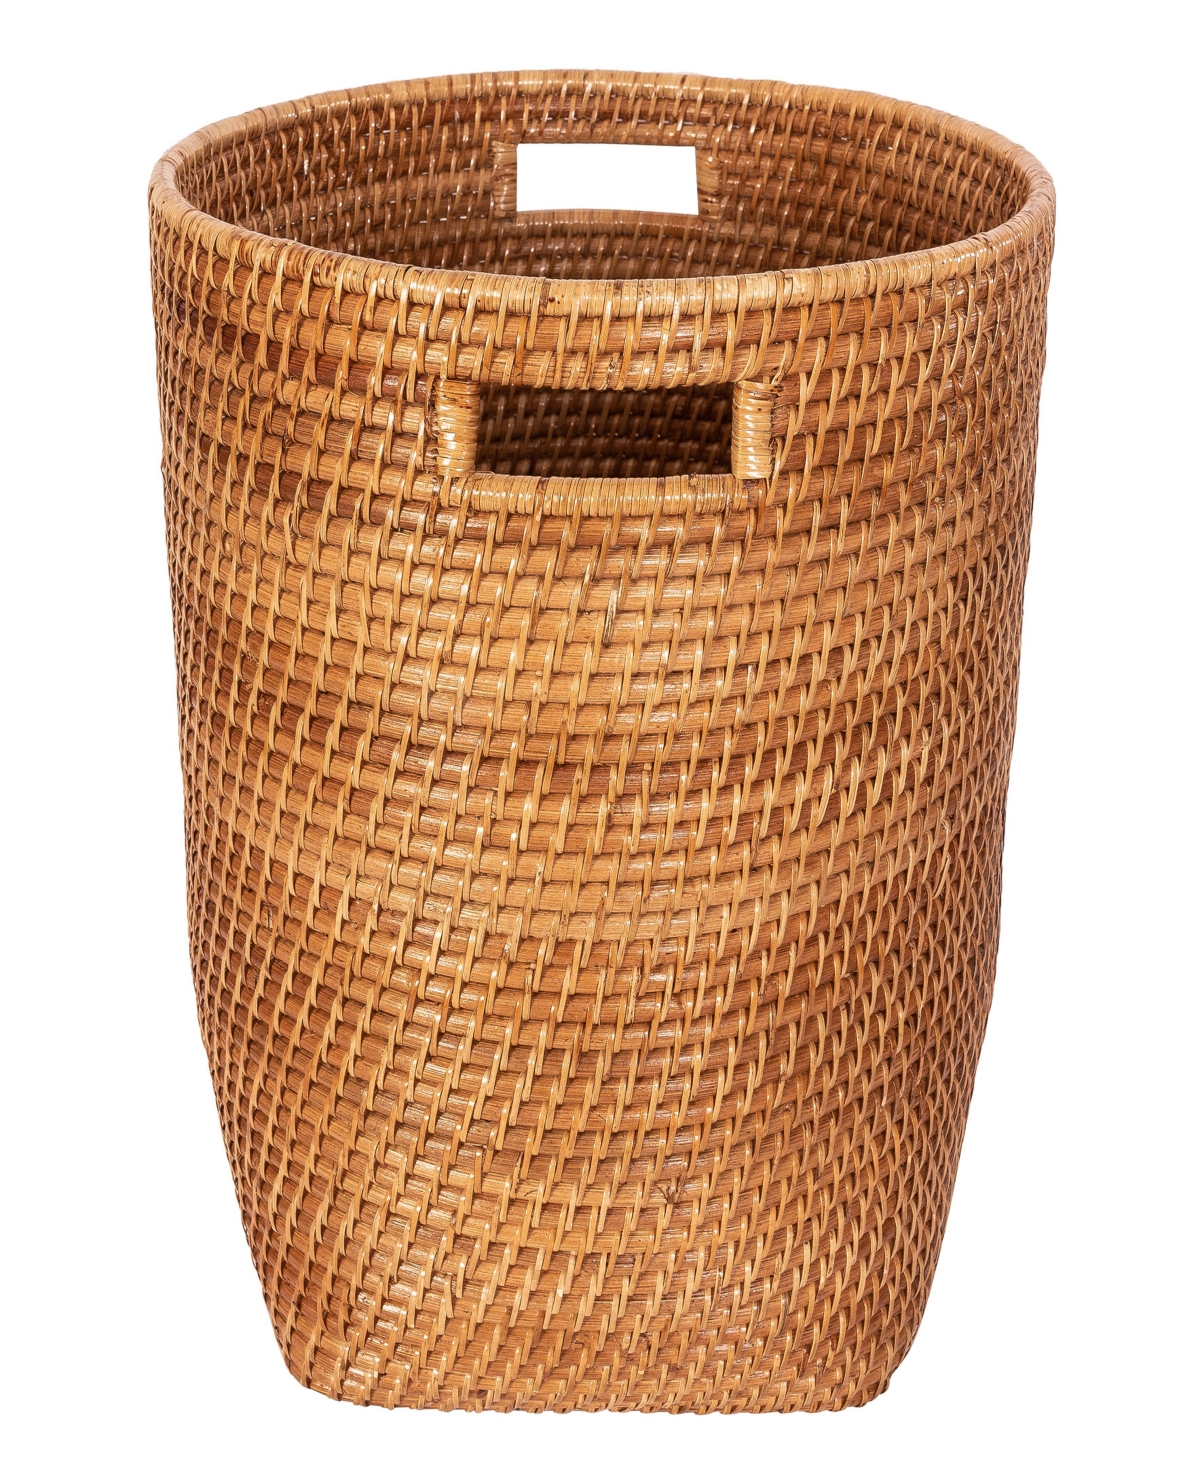 ARTIFACTS TRADING COMPANY SABOGA HOME ROUND BASKET WITH CUTOUT HANDLES